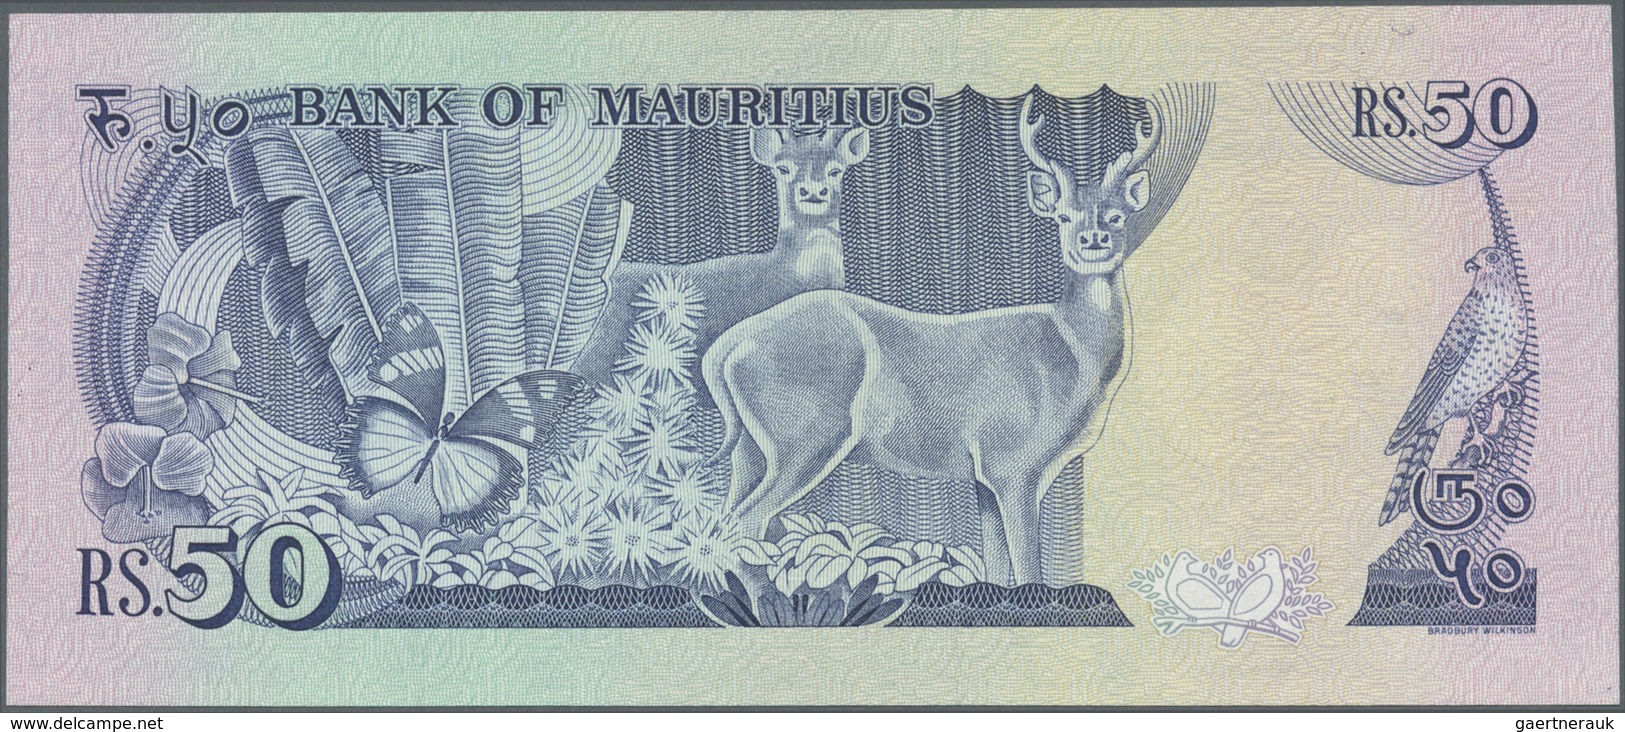 Mauritius: 50 Rupees ND P. 37, With Large Ink Error Print On Front, Condition: UNC. - Mauritius